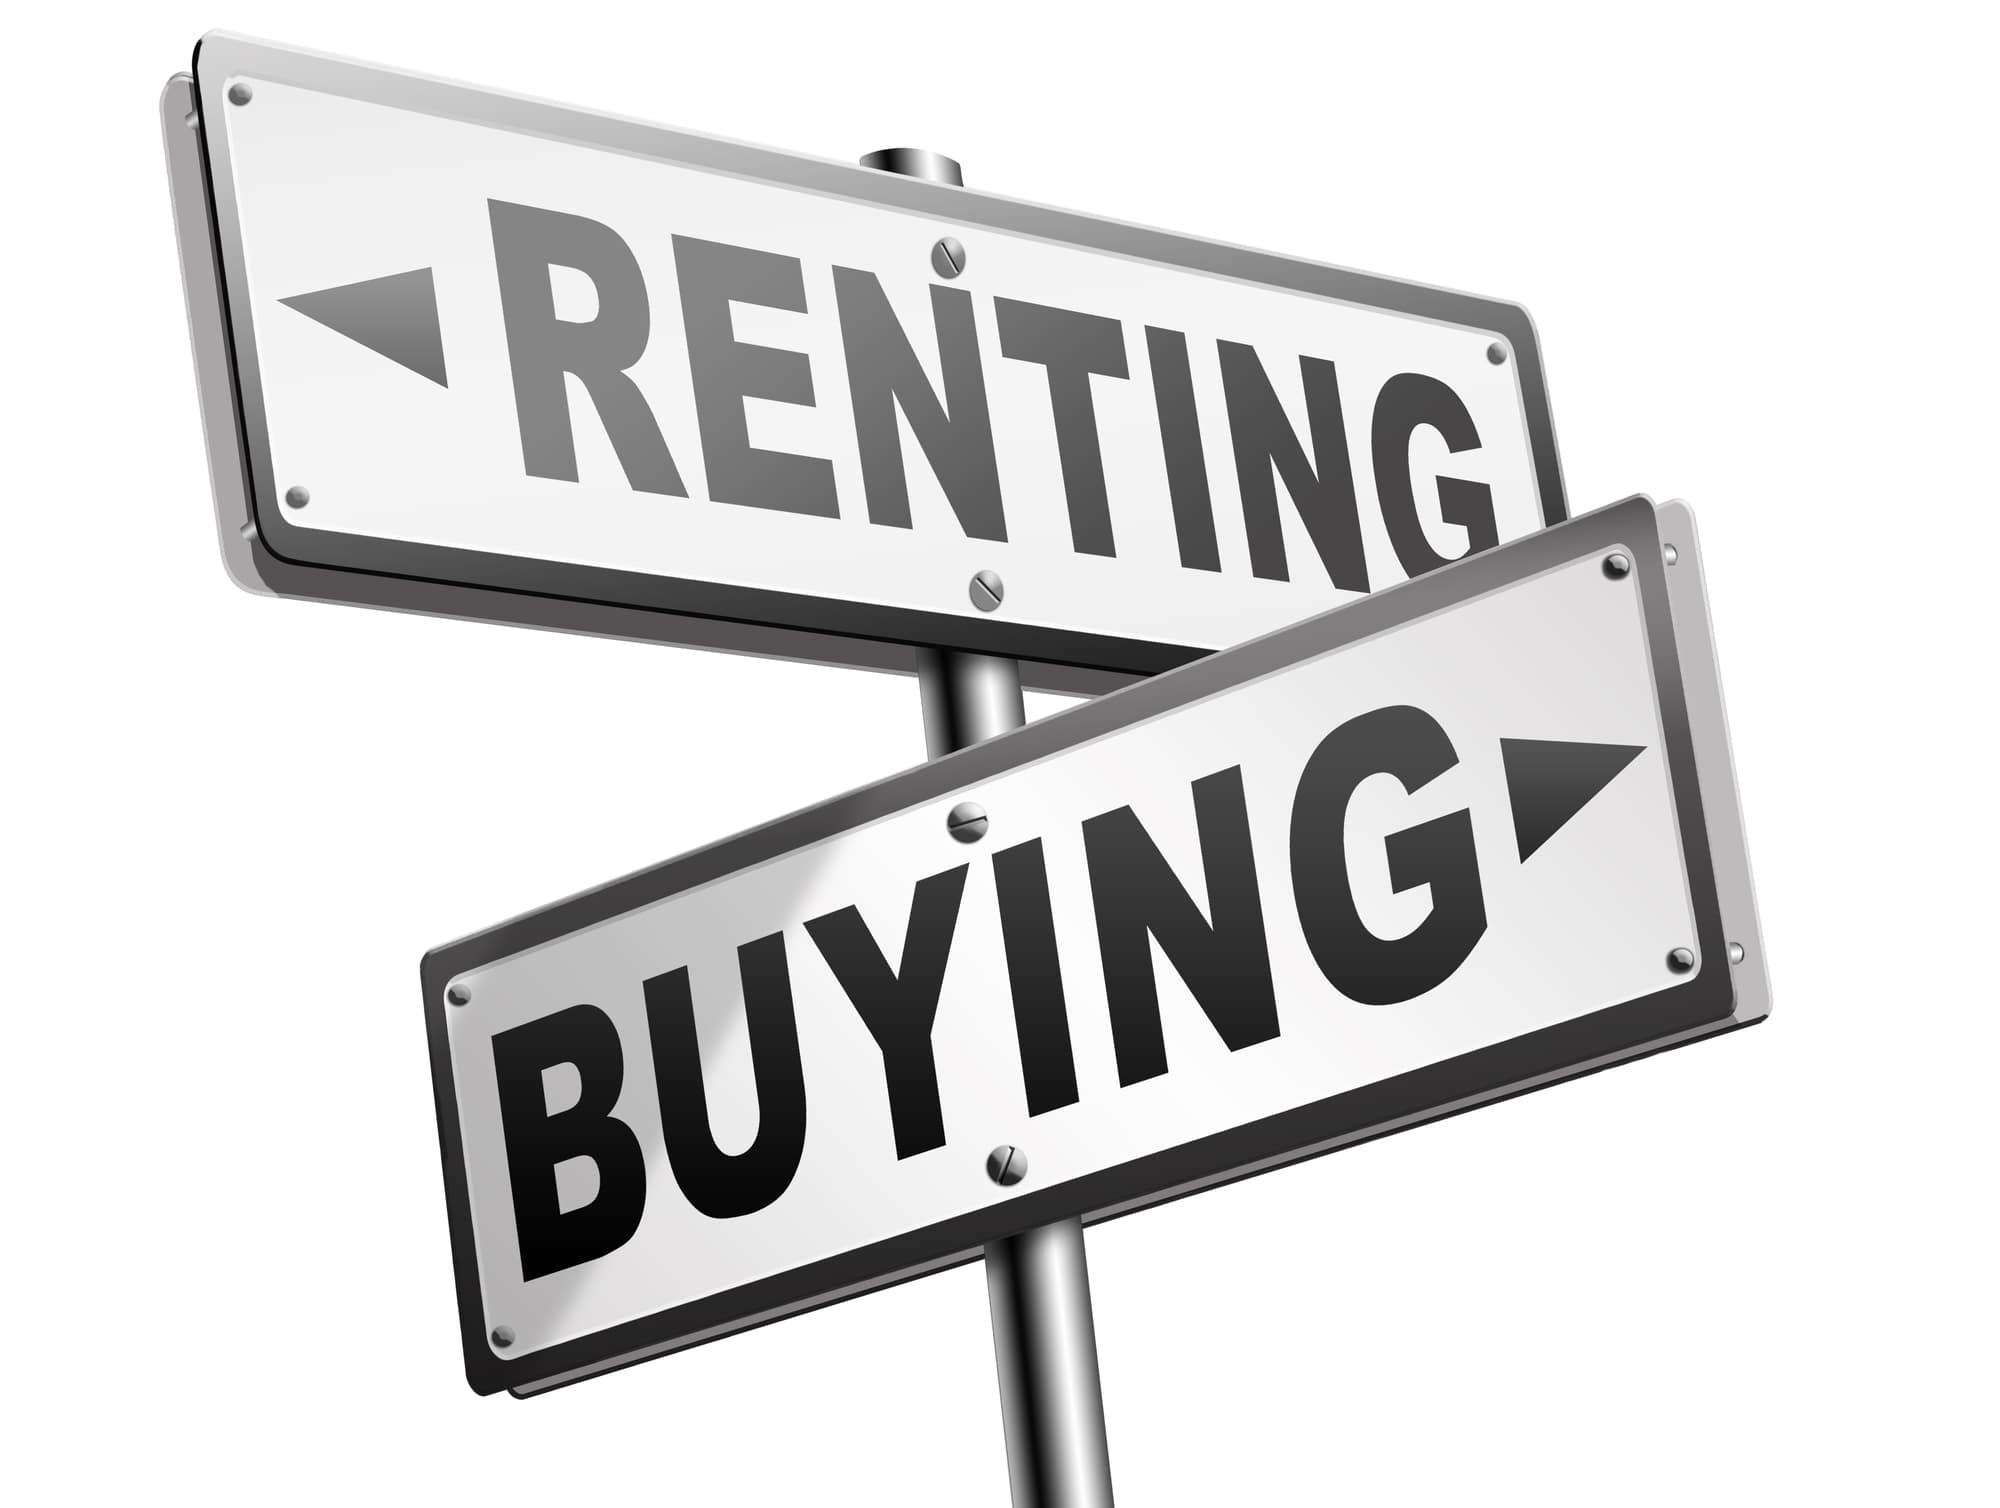 Who Says Buying is Better than Renting?